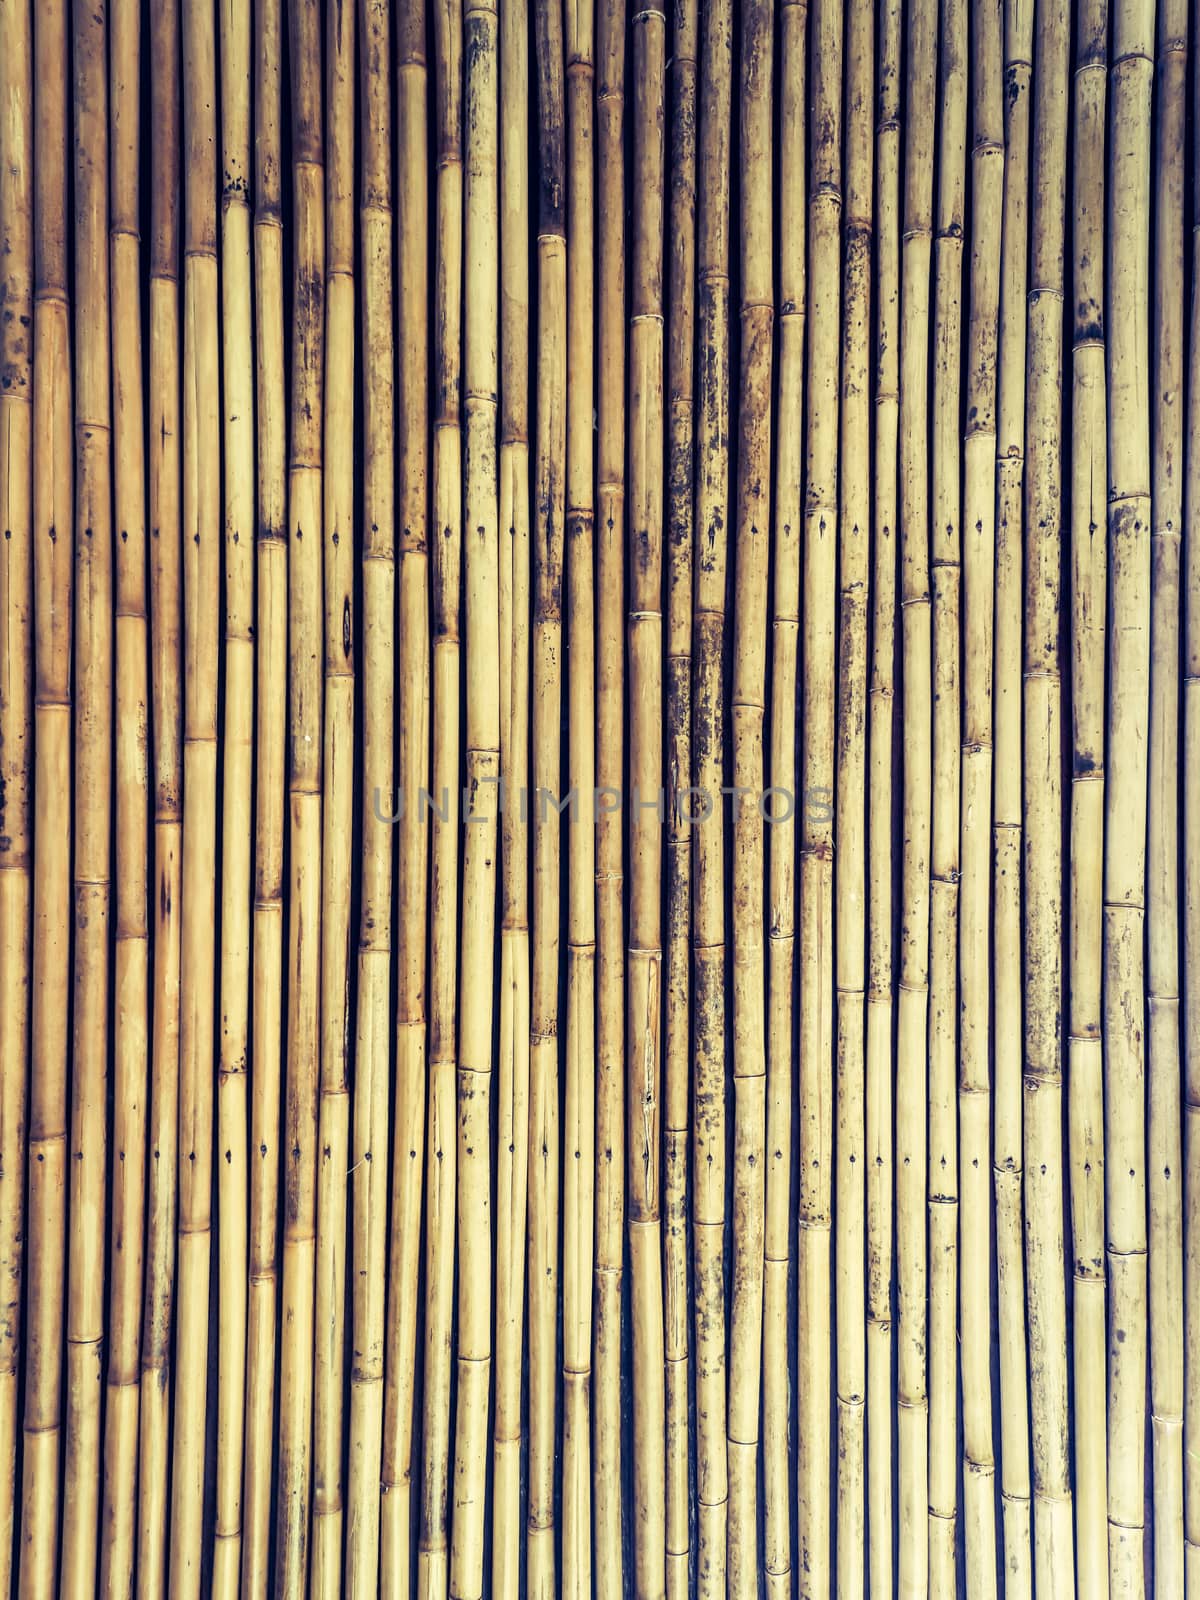 The old bamboo walls background.